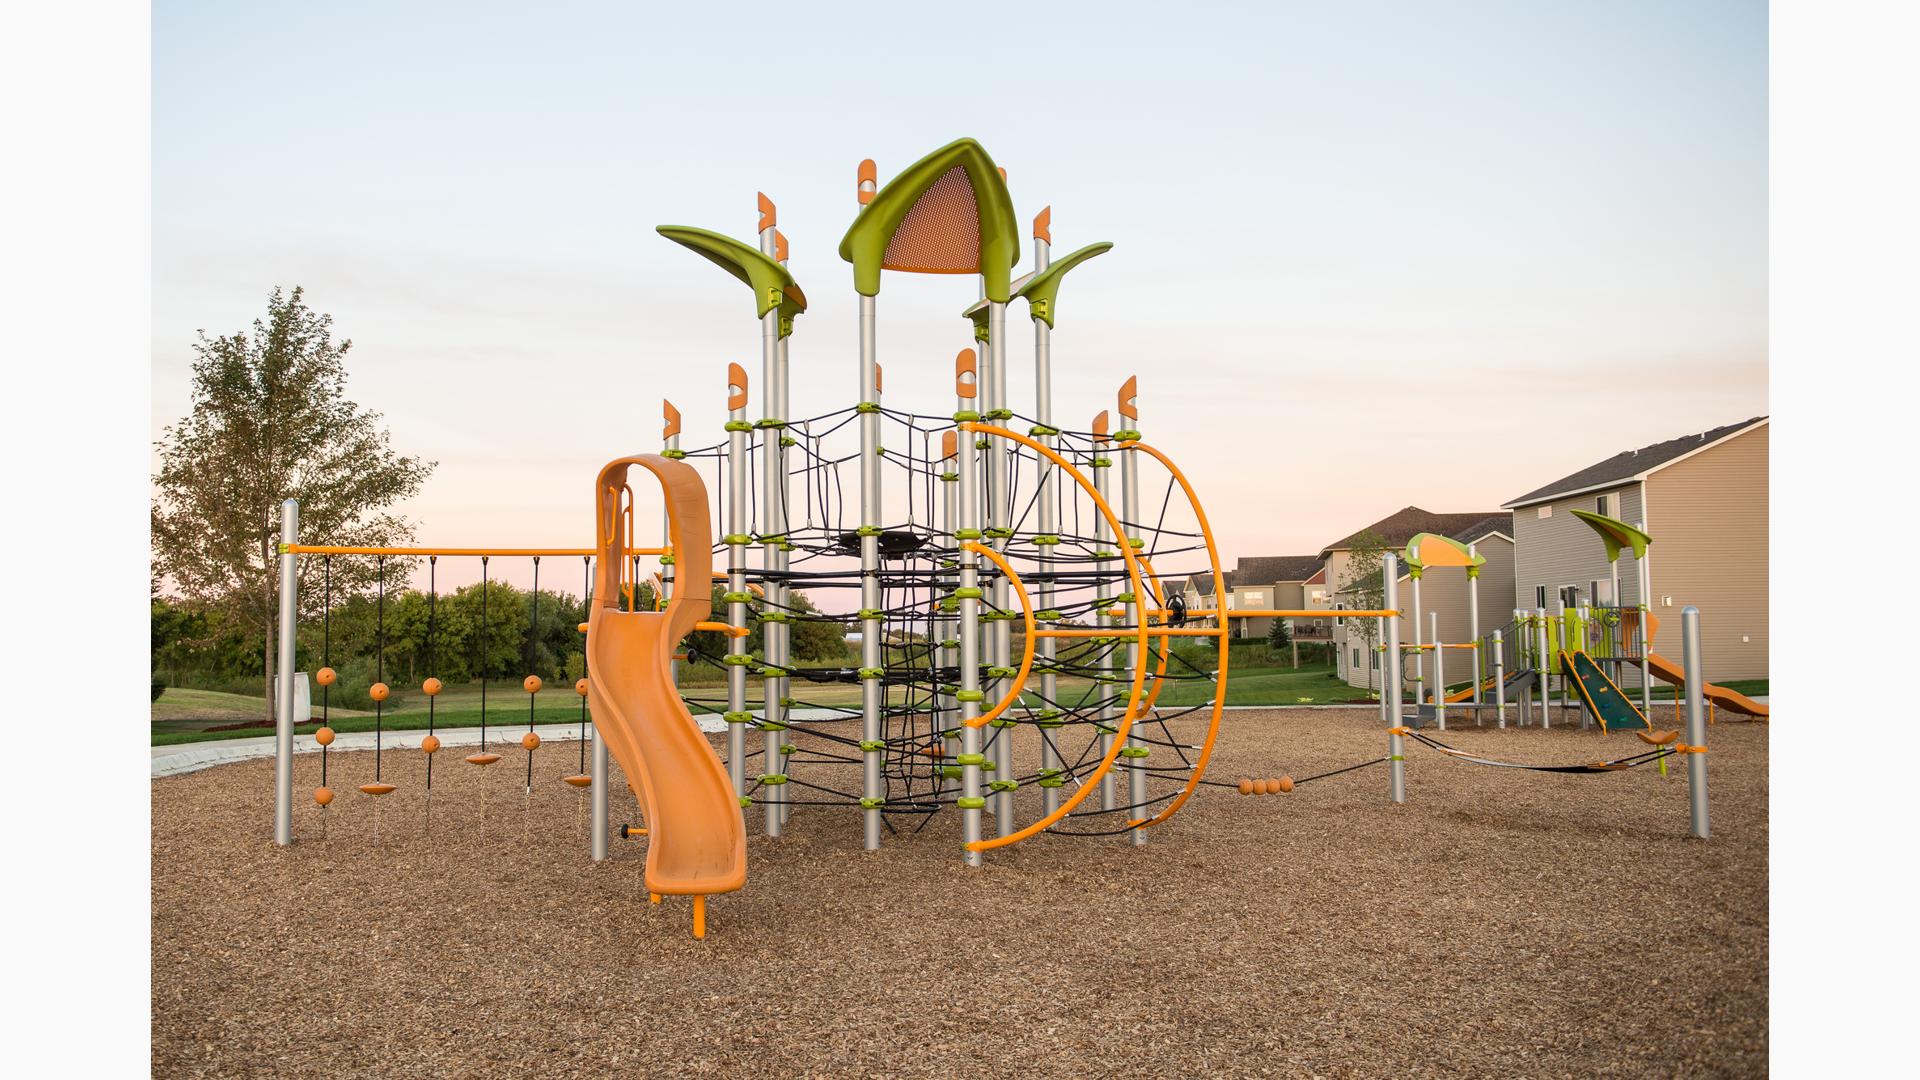 A neighborhood park playground with a post tower playground equipped with connecting webbed climbing ropes and a gold slide.